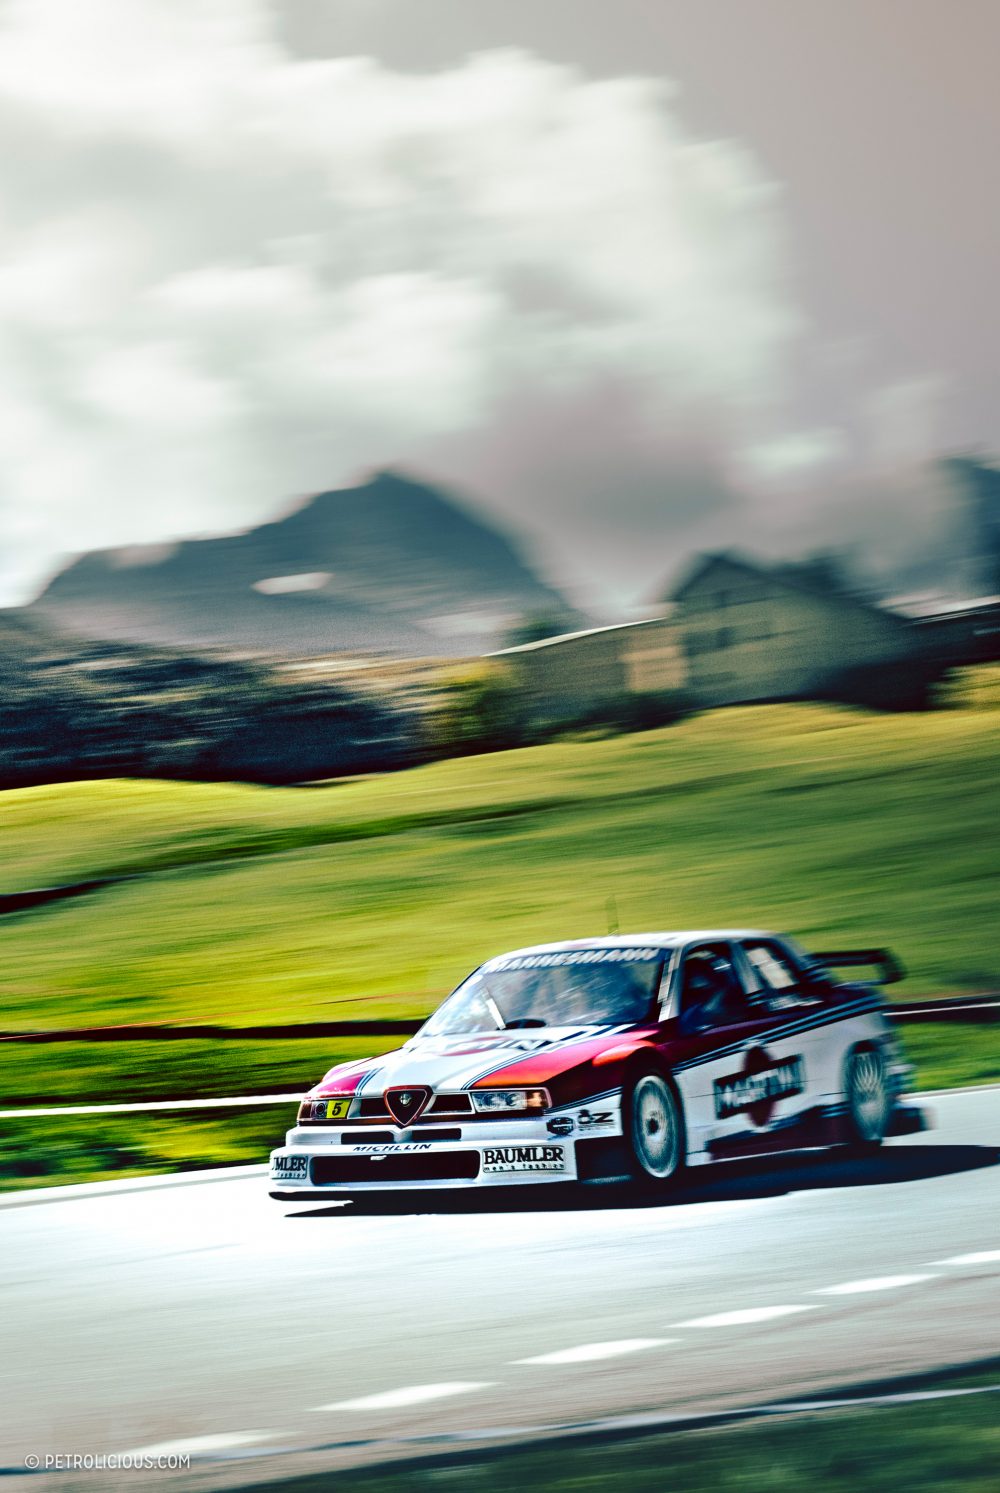 Italy's Greatest Touring Car: Experiencing The Alfa Romeo 155 V6 TI DTM High In The Swiss Alps • Petrolicious